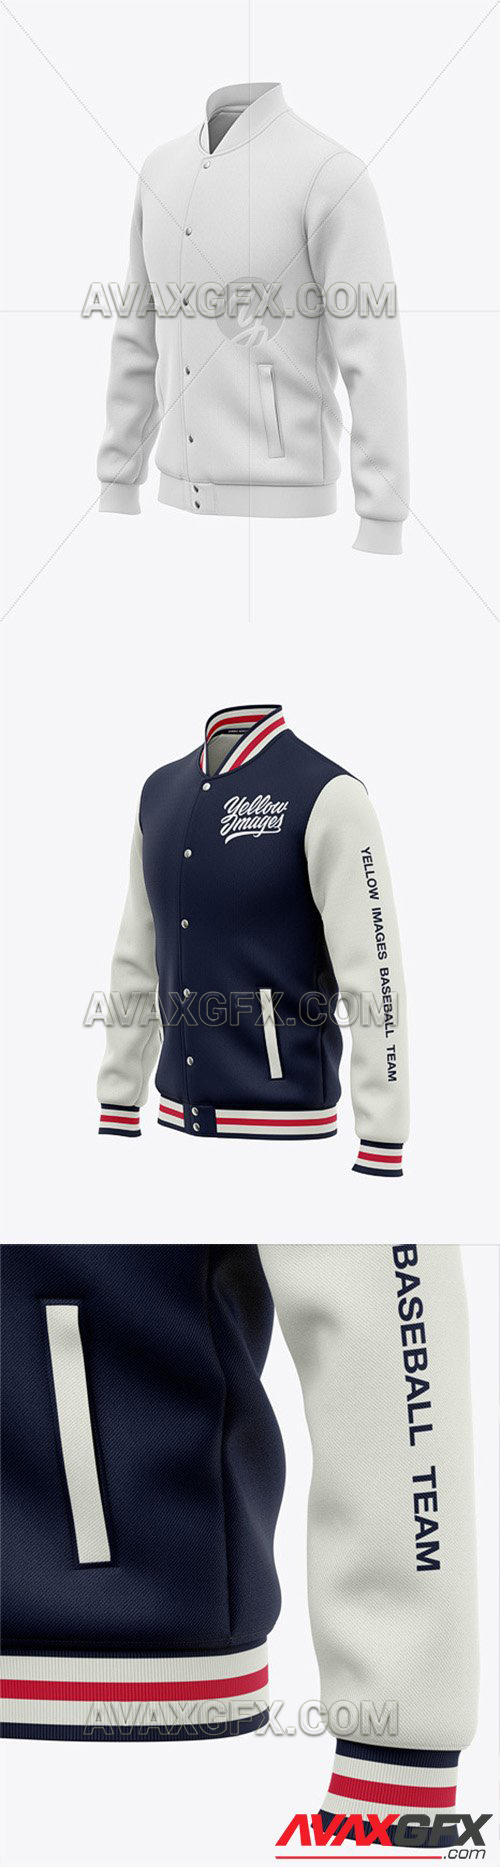 Download Men S Varsity Jacket Mockup Front Half Side View 60146 Avaxgfx All Downloads That You Need In One Place Graphic From Nitroflare Rapidgator